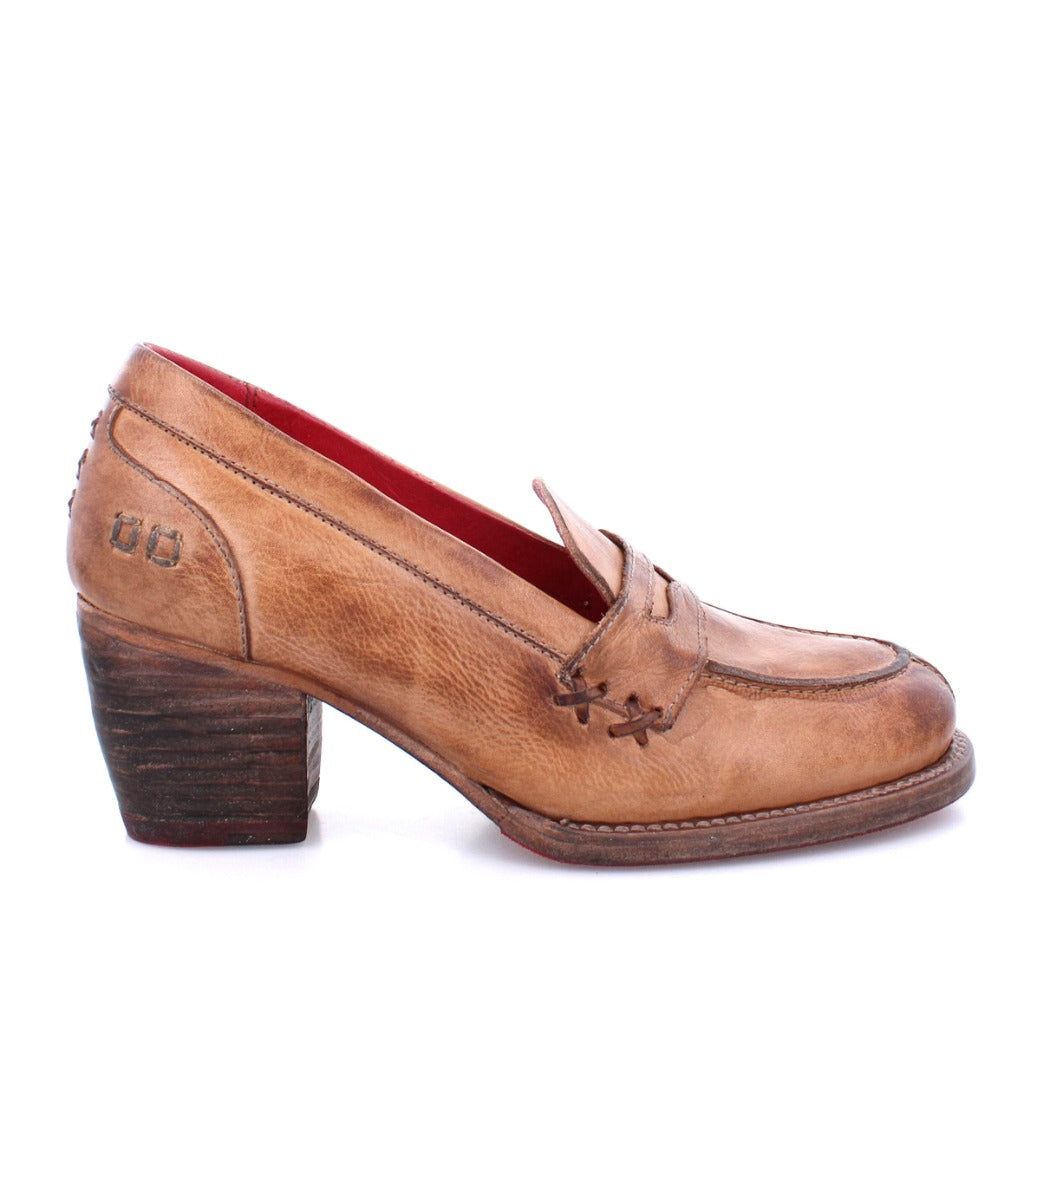 A women's Liberty brown loafer with a wooden heel by Bed Stu.